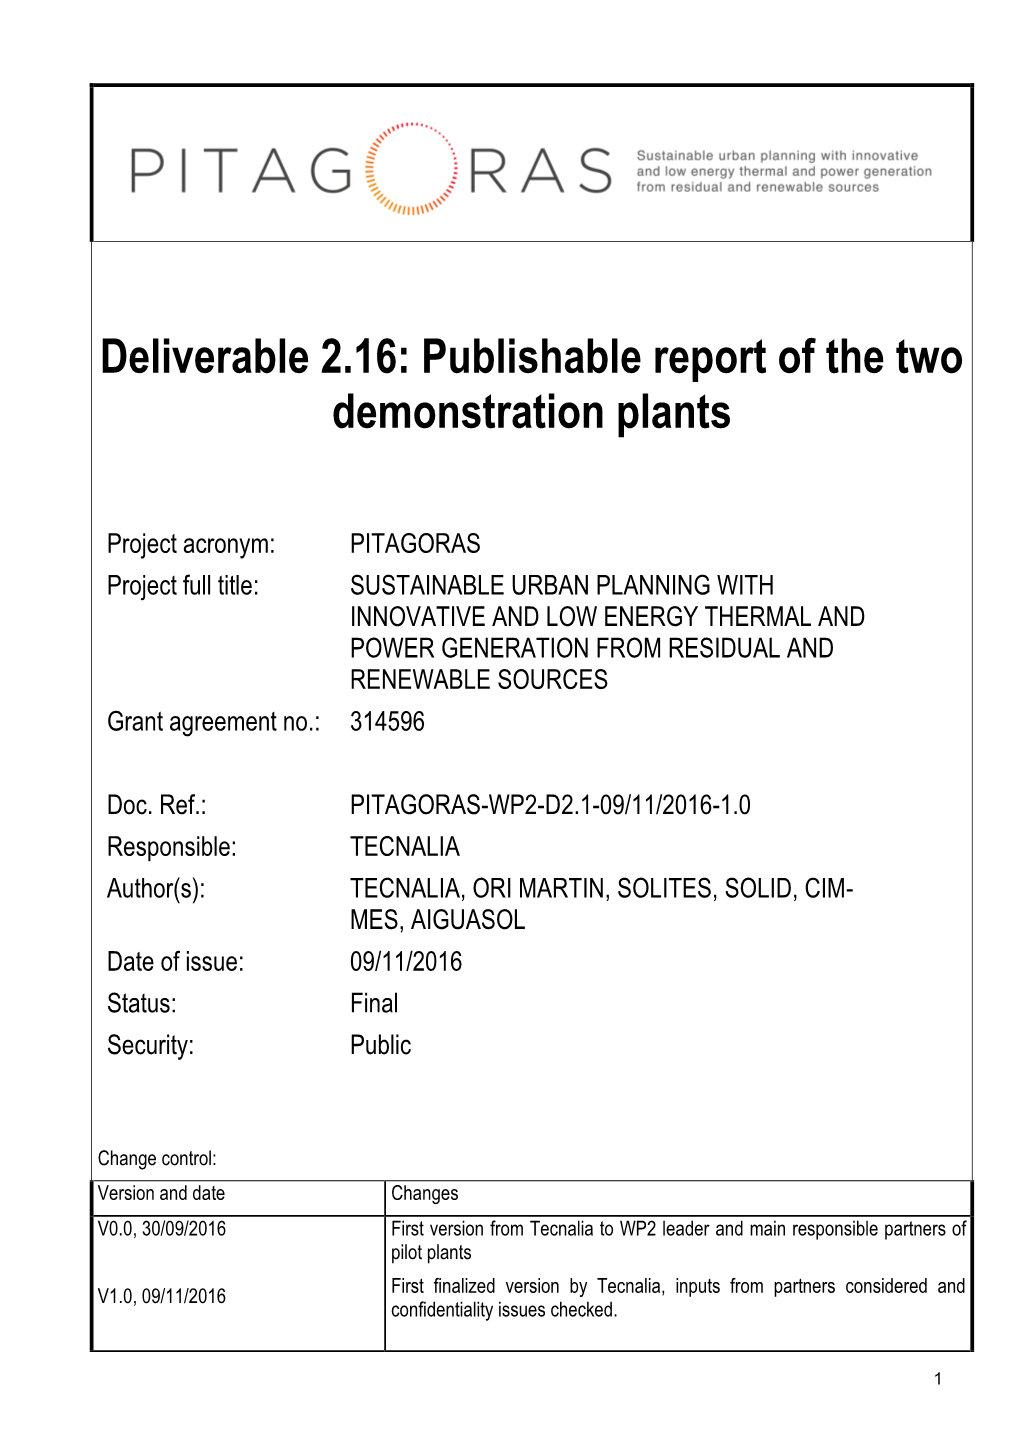 Deliverable 2.16: Publishable Report of the Two Demonstration Plants